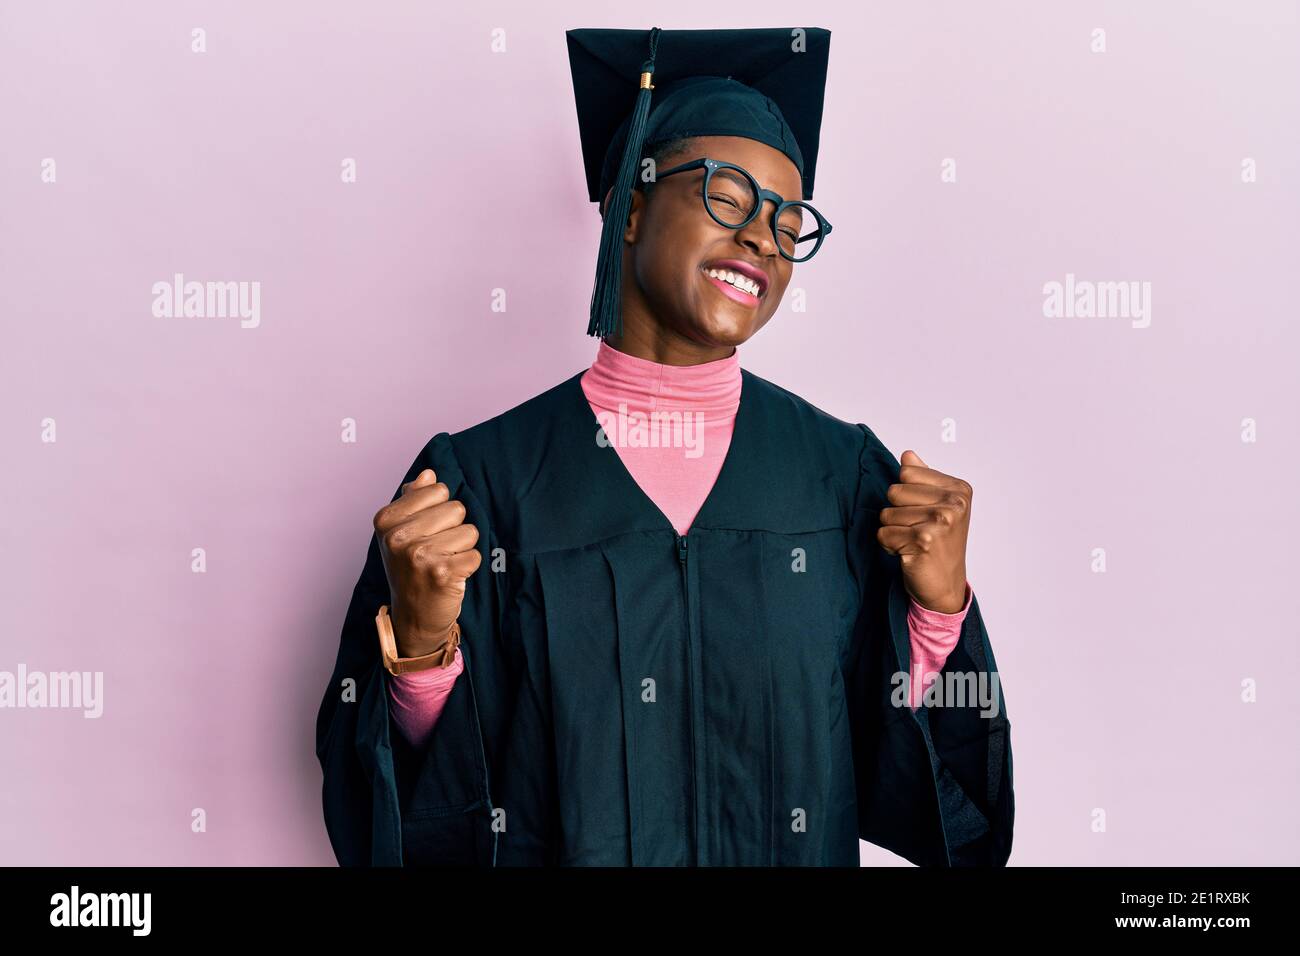 Young african american girl wearing graduation cap and ceremony robe very happy and excited doing winner gesture with arms raised, smiling and screami Stock Photo